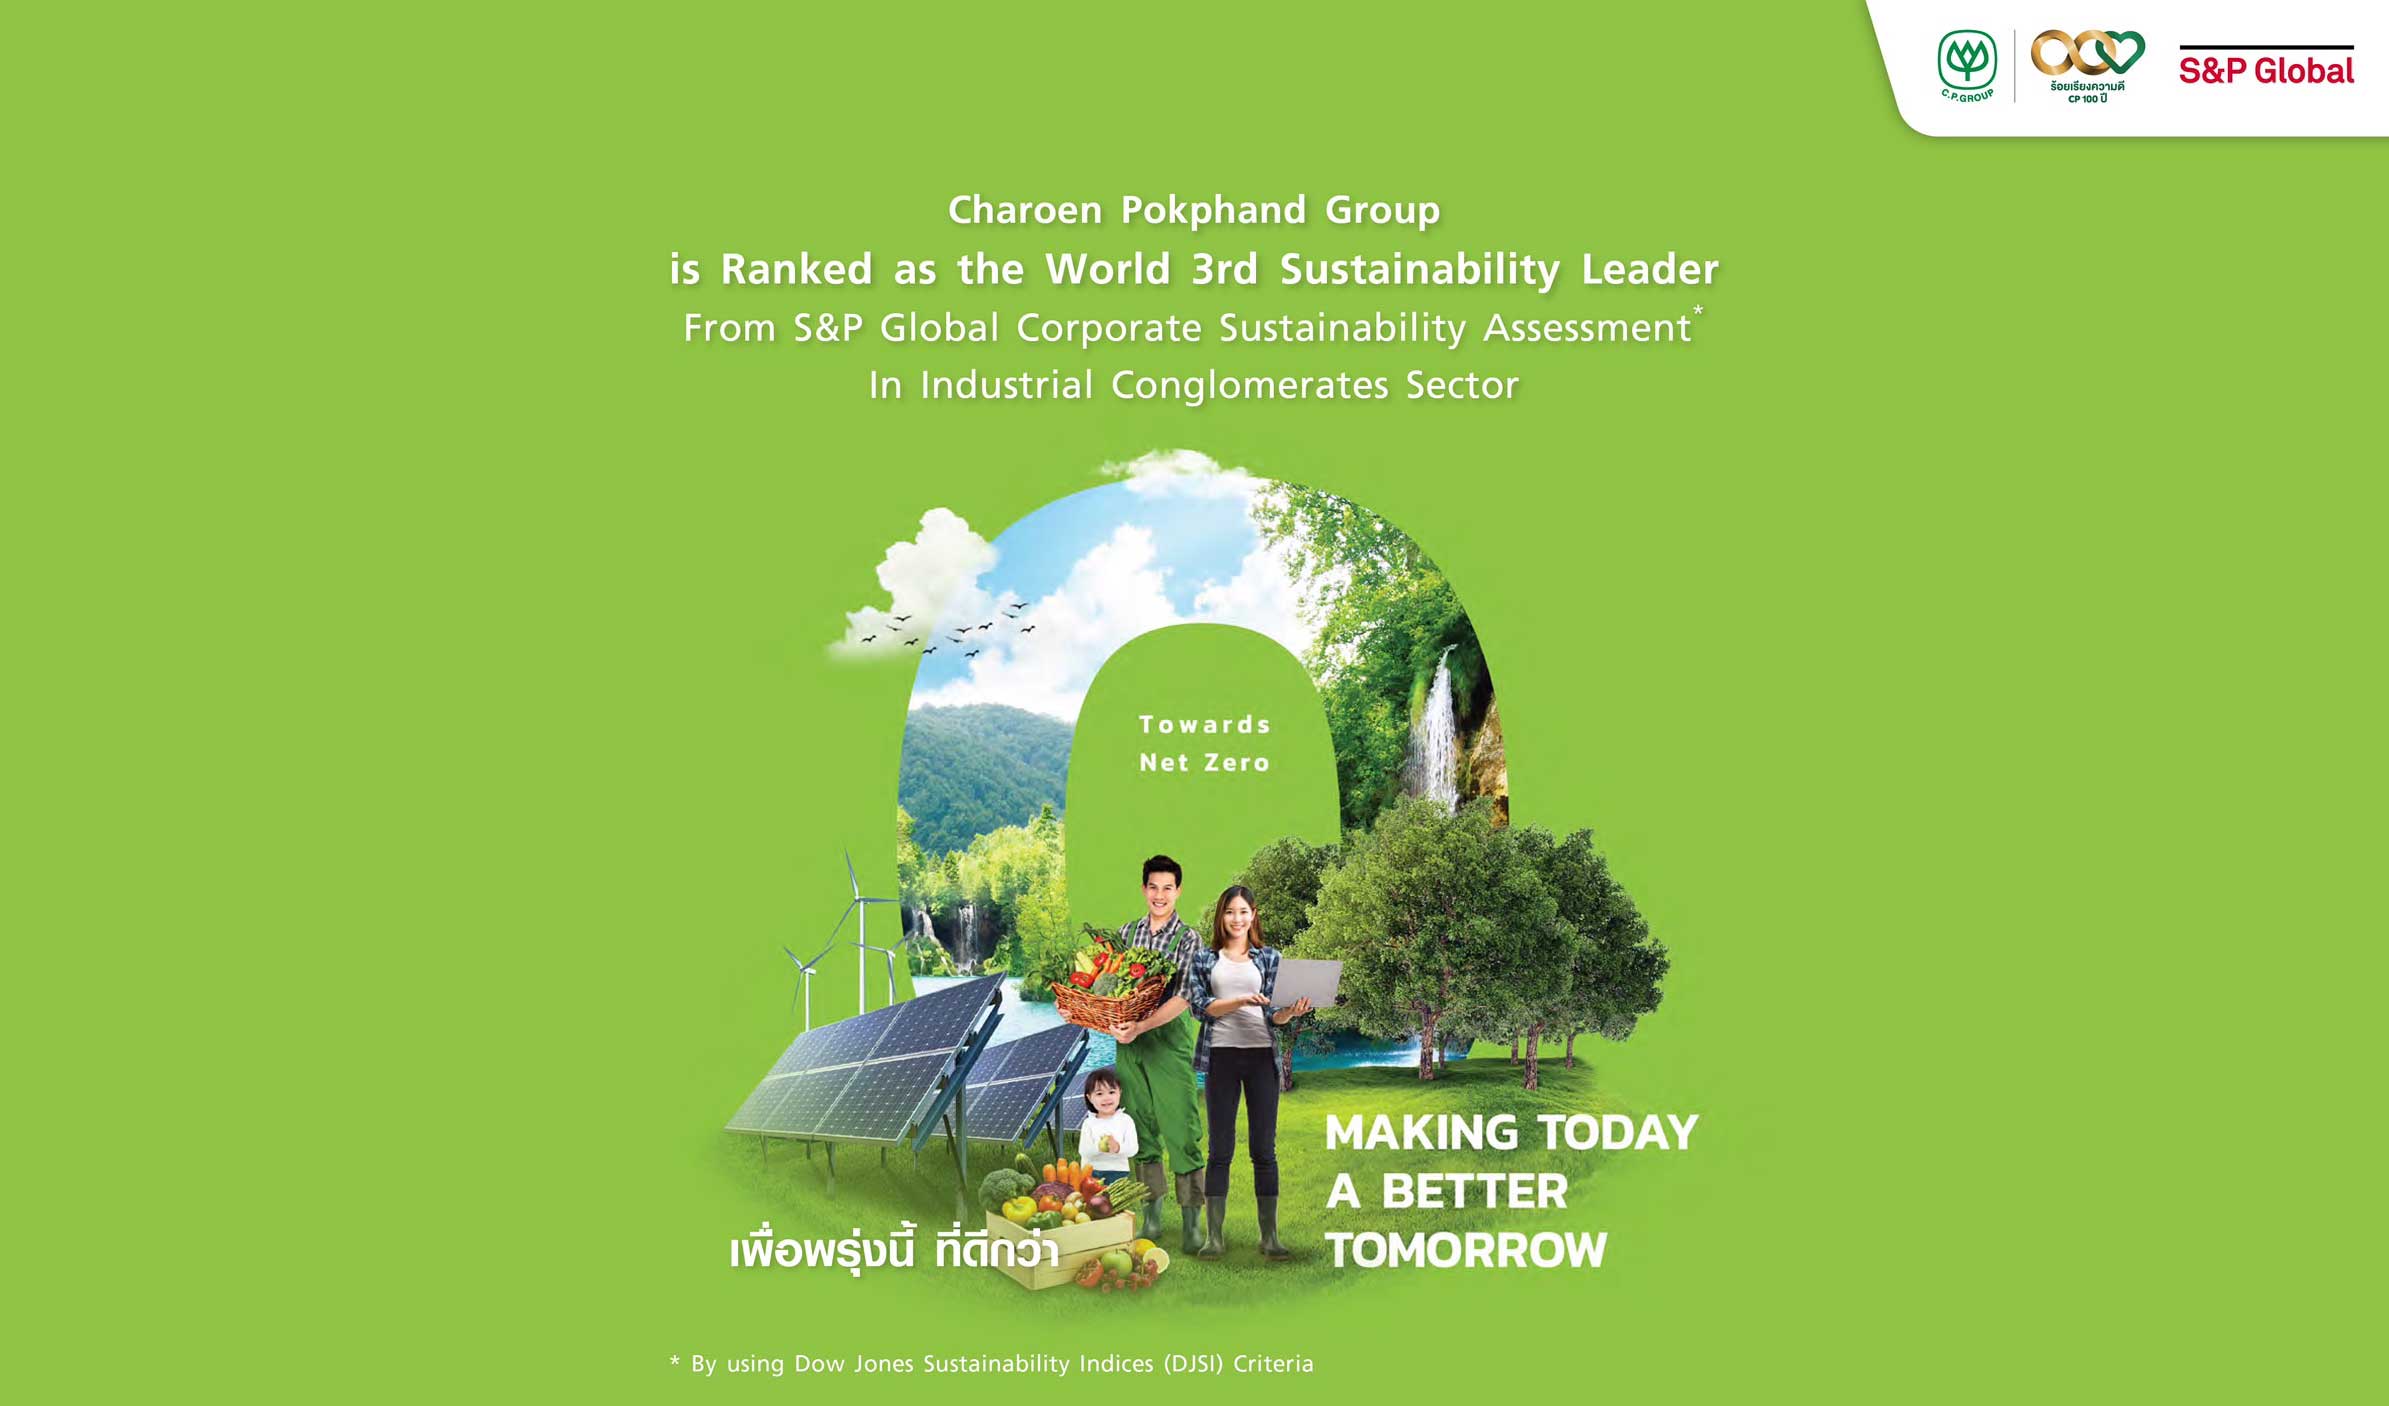 C.P. Group listed as Top 3 Global Sustainable Companies from the Corporate Sustainability Assessment by S&P Global under ‘Industrial Conglomerates’ (IDD: Industrial Conglomerates)